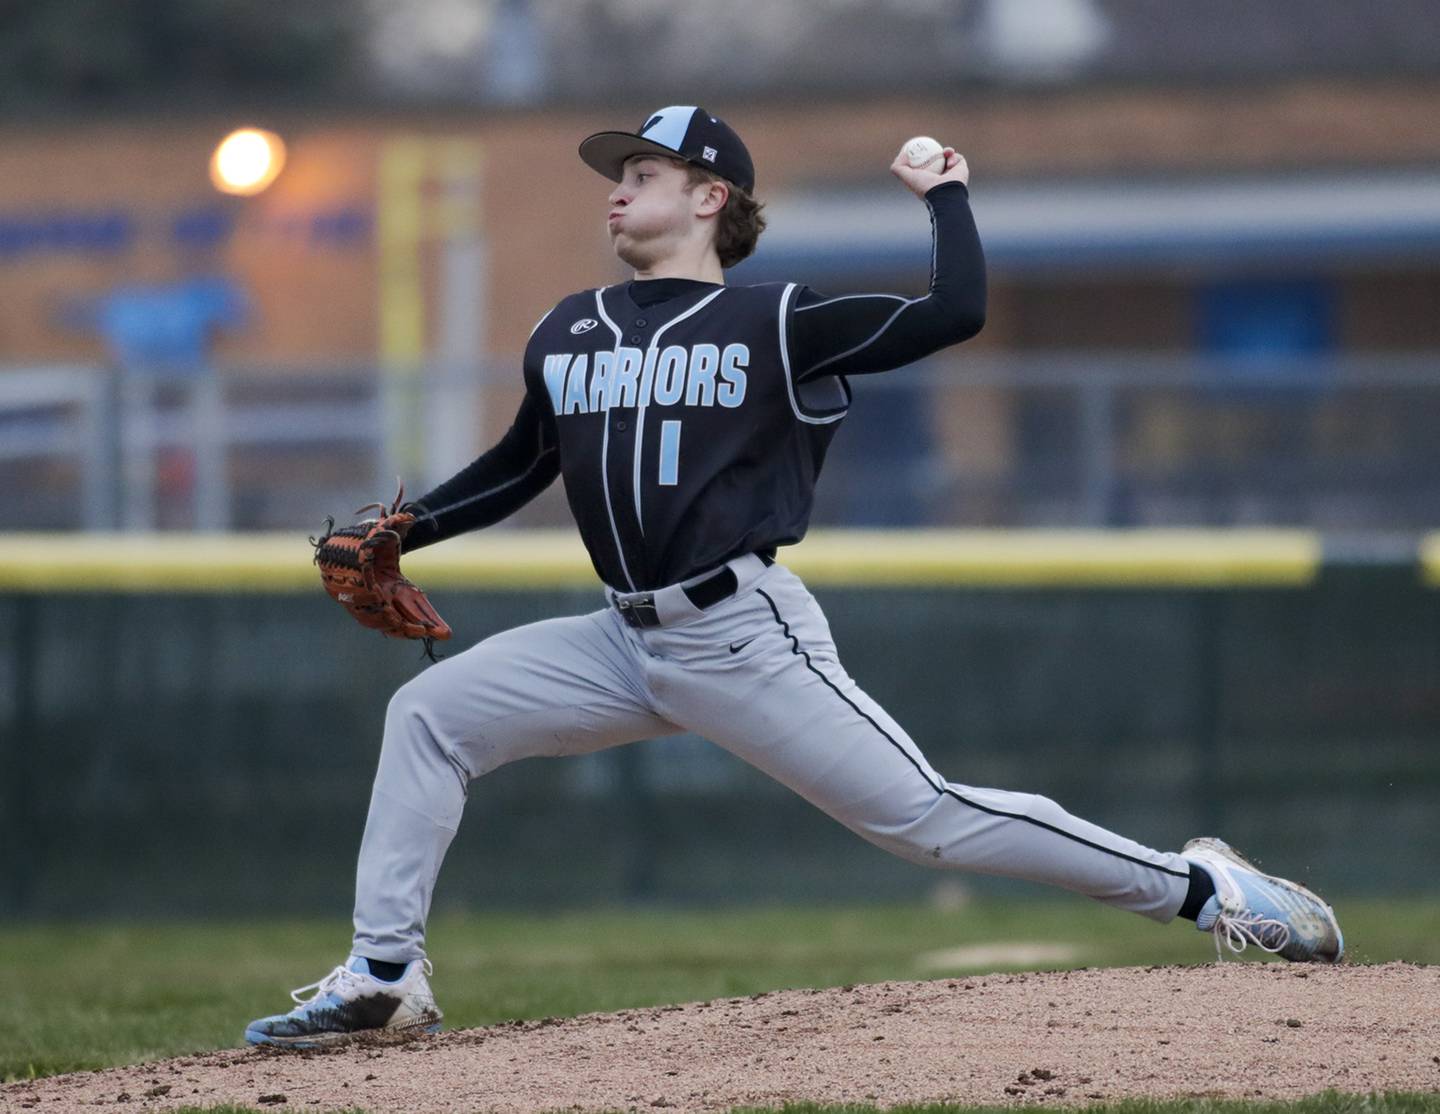 Willowbrook’s Max Vaisvila delivers a pitch against Downers Grove South during a game in Downers Grove on Tuesday, April 5, 2022.